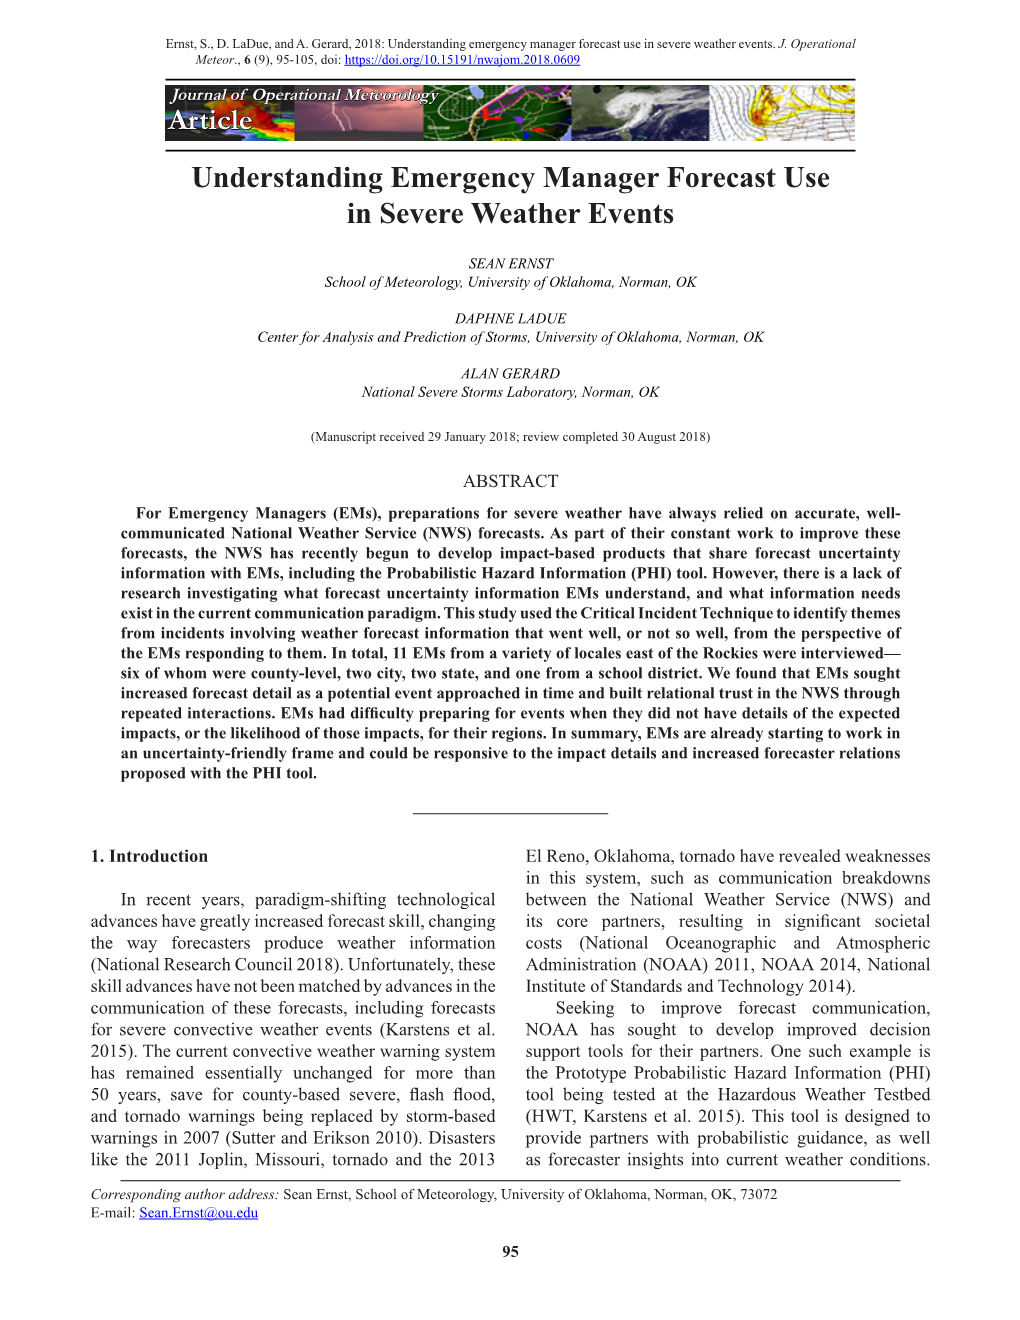 Understanding Emergency Manager Forecast Use in Severe Weather Events